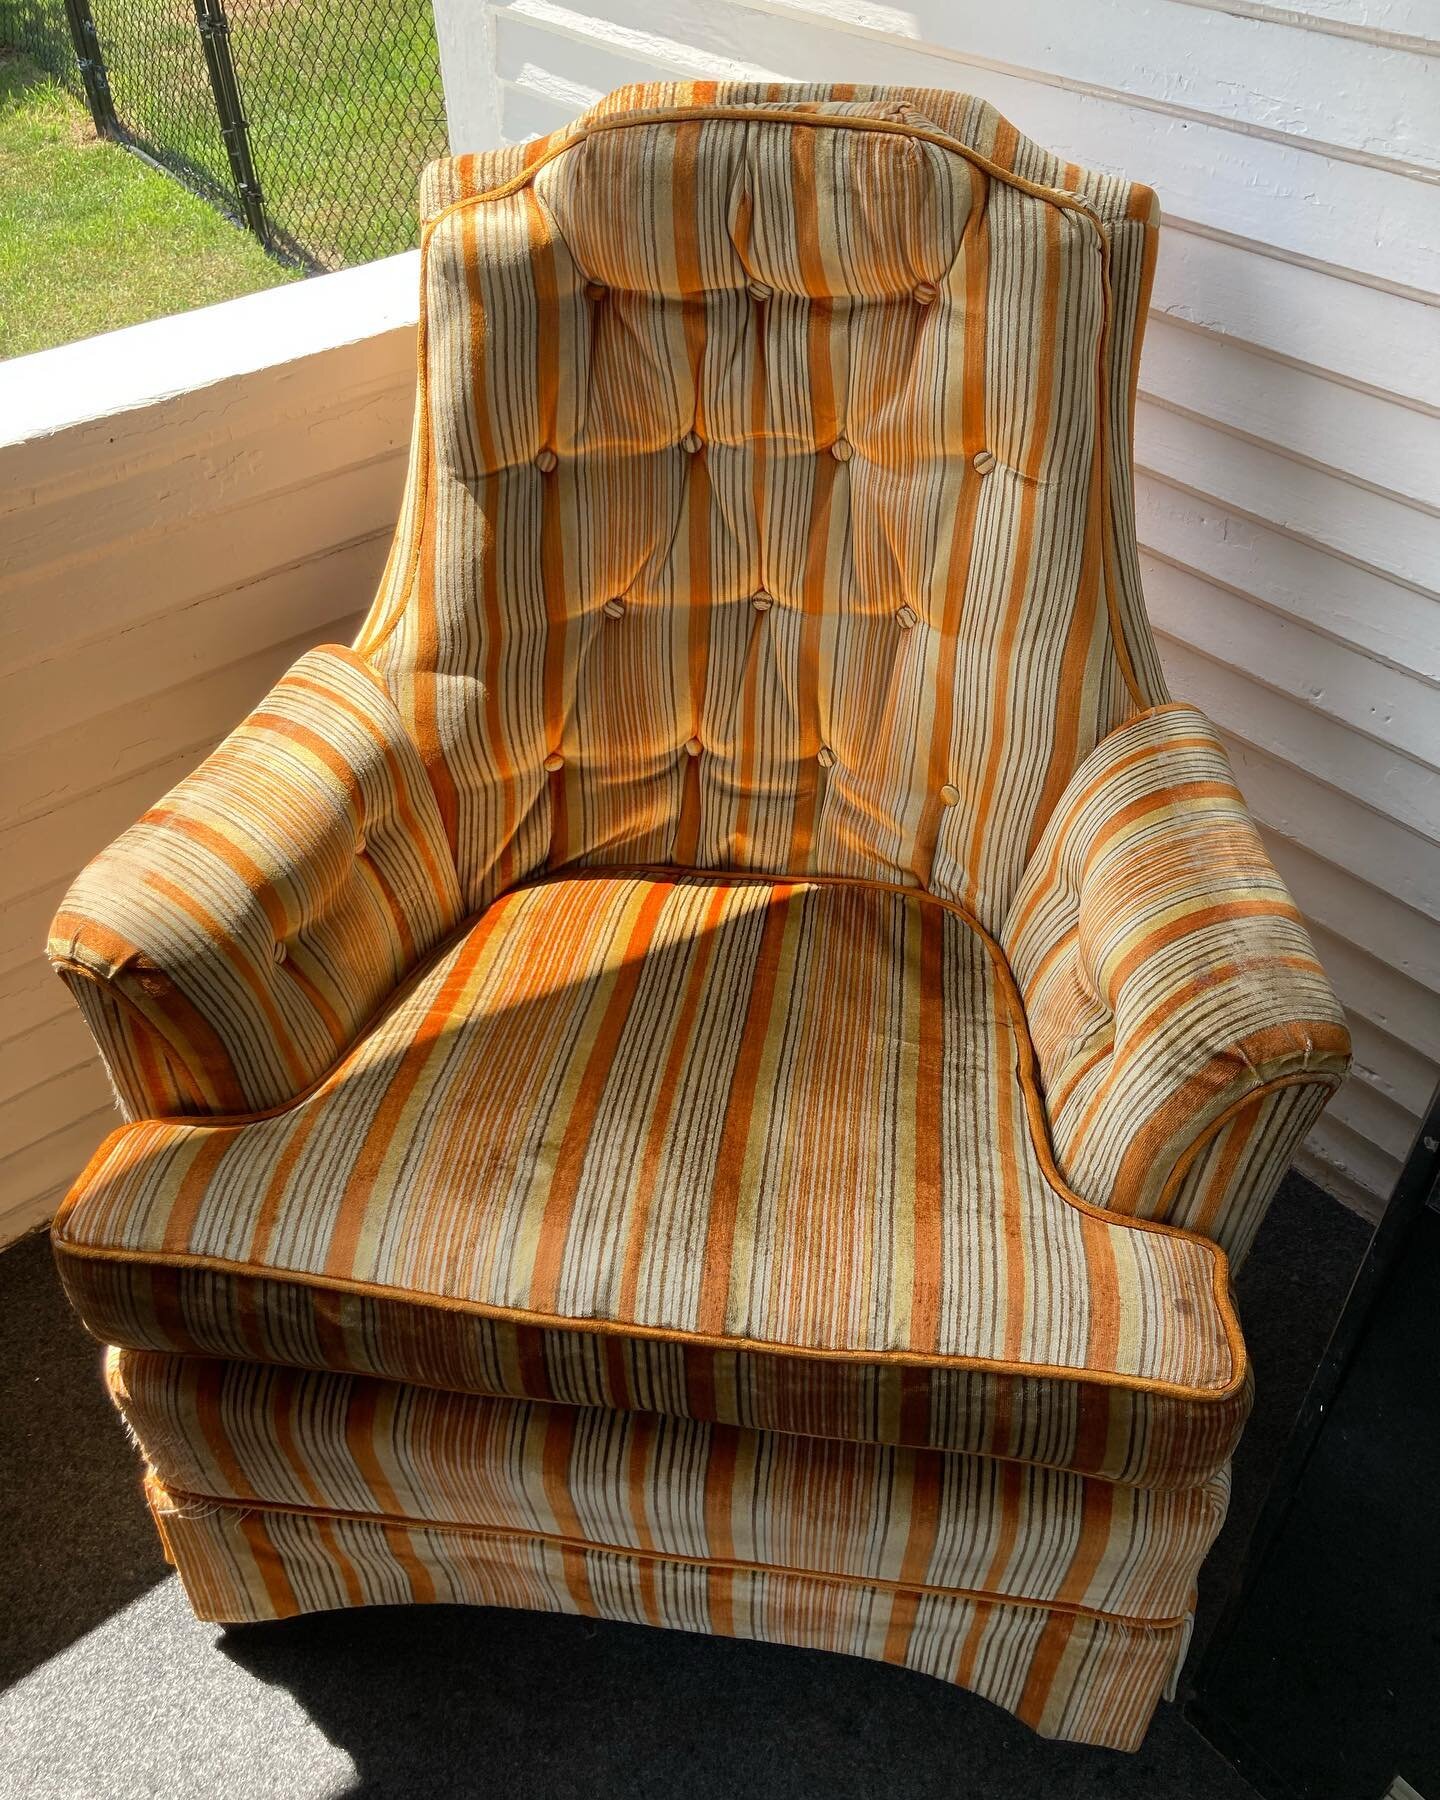 Over the last several weeks, I've let go of most of my possessions - selling, donating, gifting... and all of it has felt in flow, easy, effortless. 

So when a young couple picked up this old retro orange chair in the early hours this morning, I was